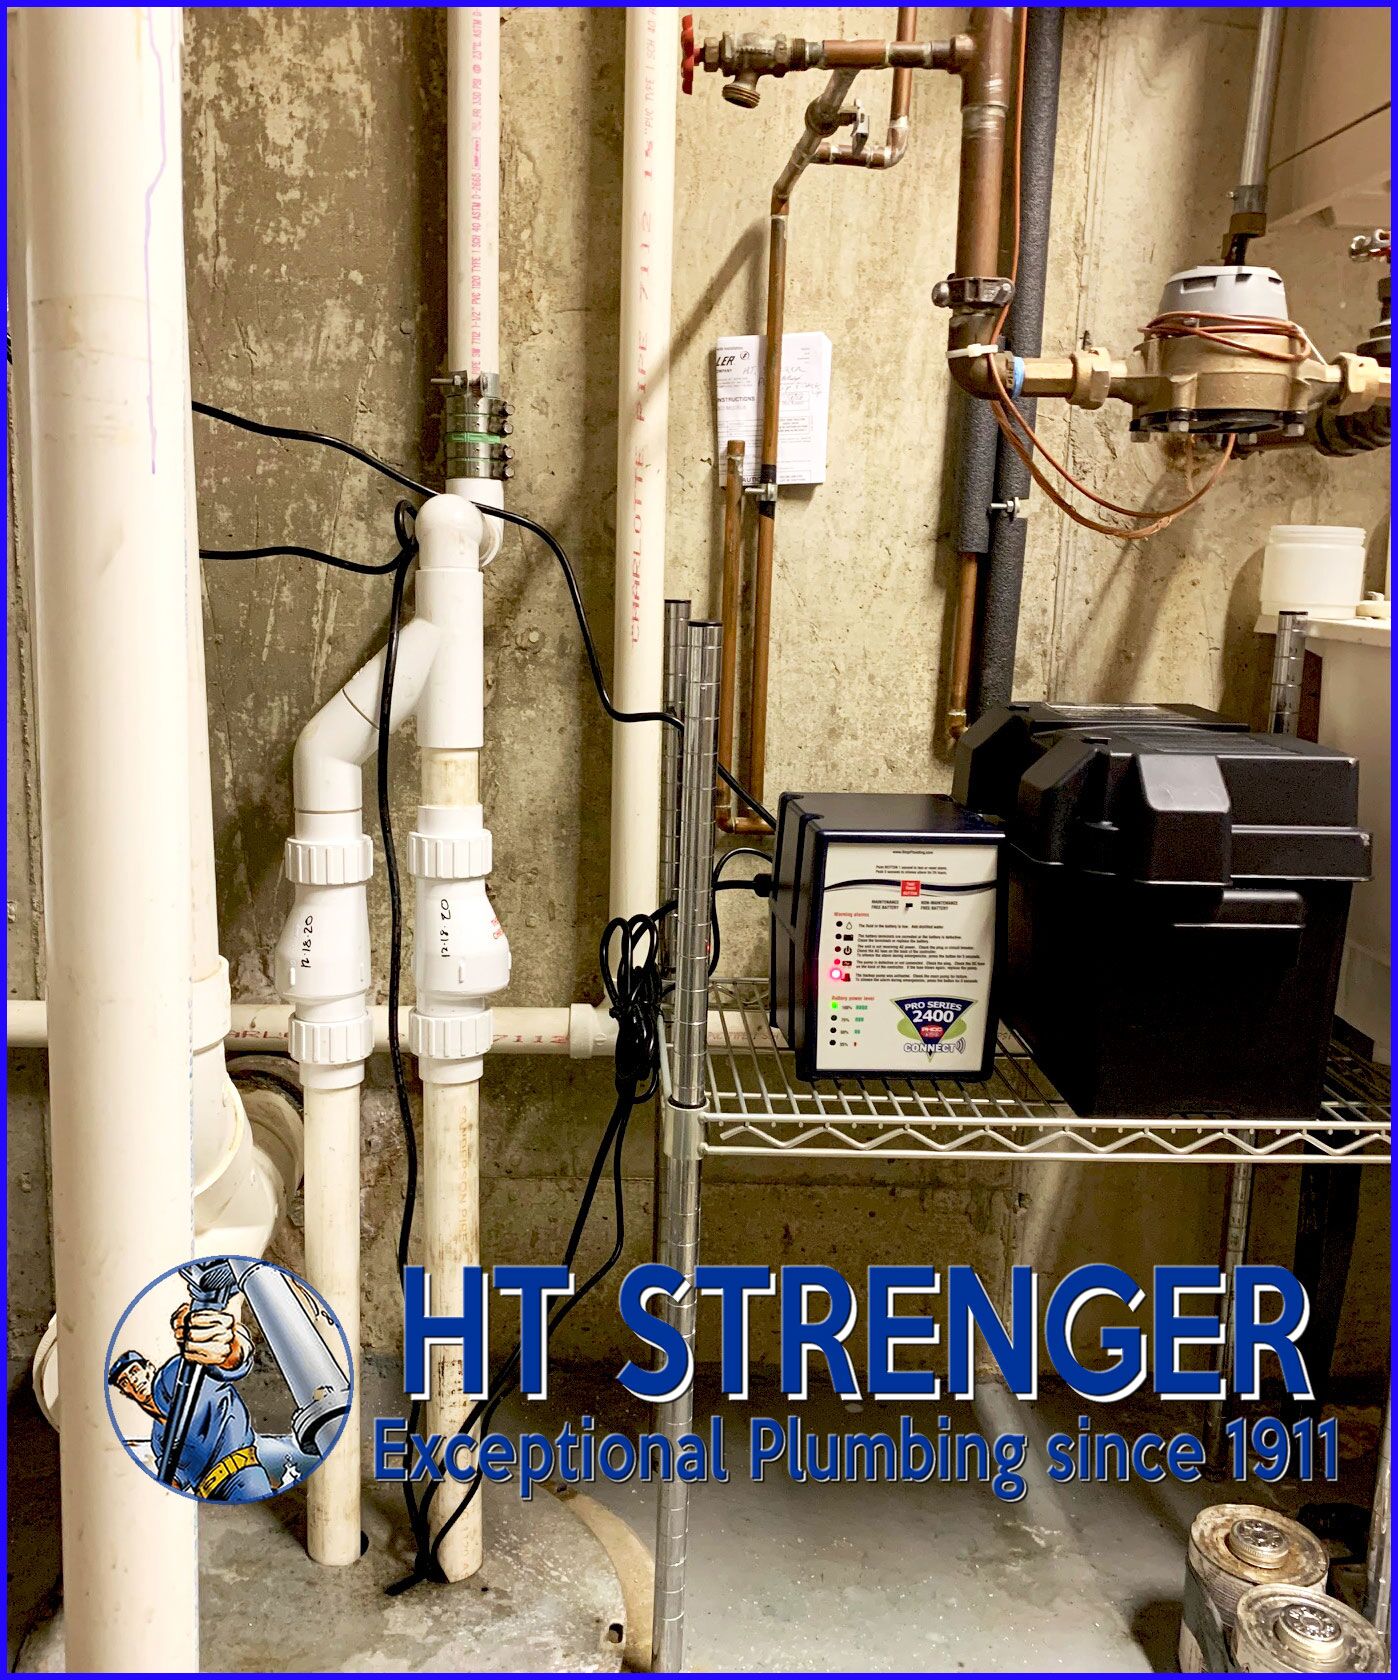 HT Strenger Plumbing - Complete Plumbing Services in Chicagoland